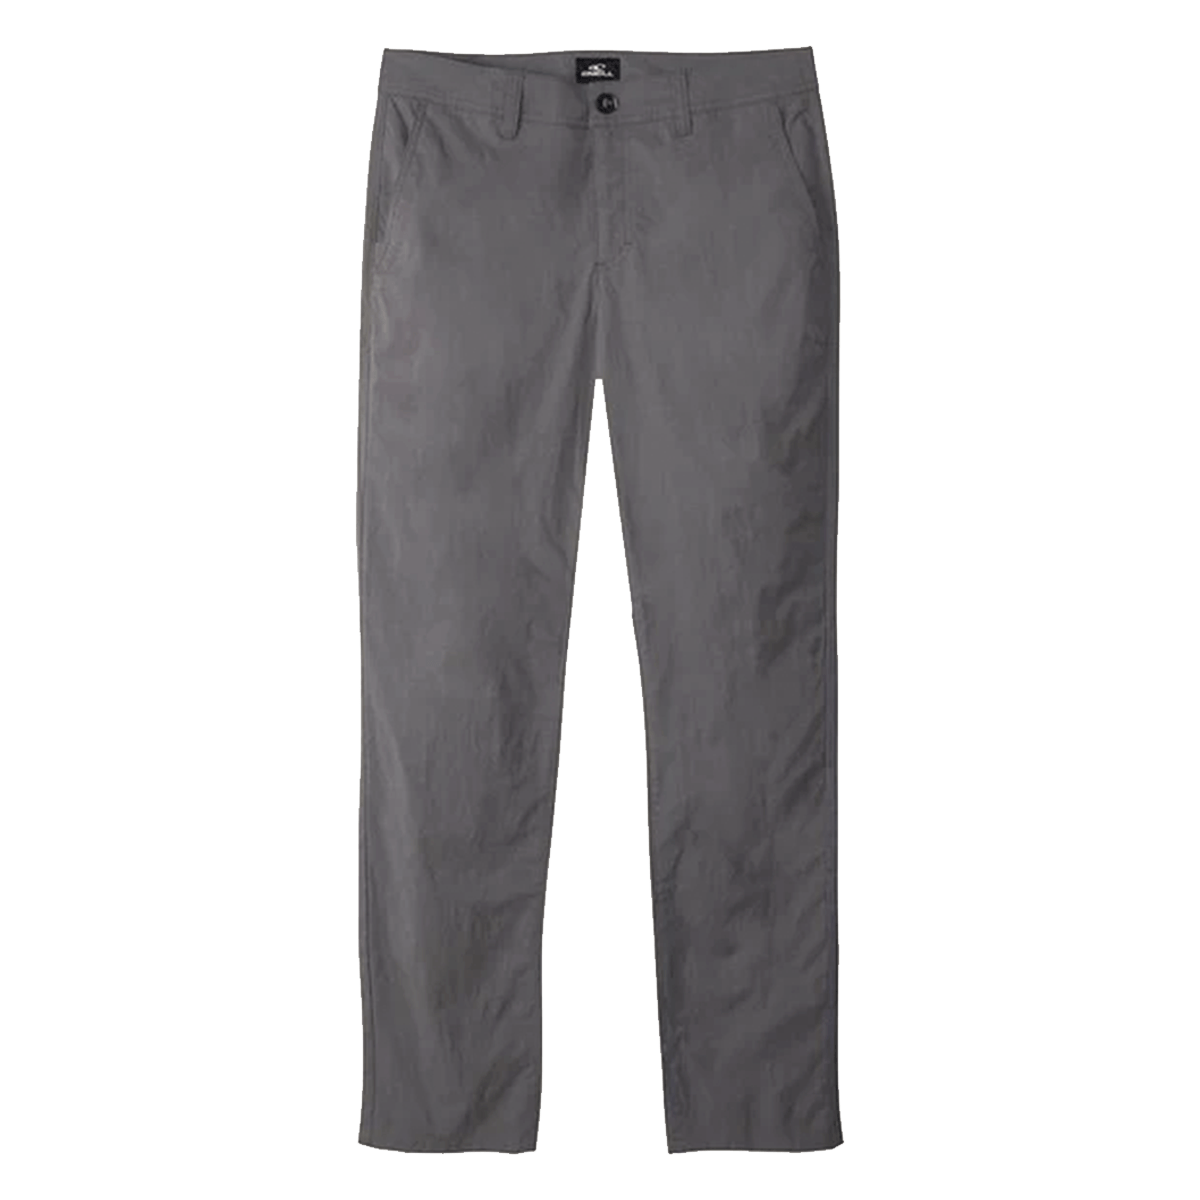 O'Neill Mission Hybrid Chino Pants in Grey - BoardCo